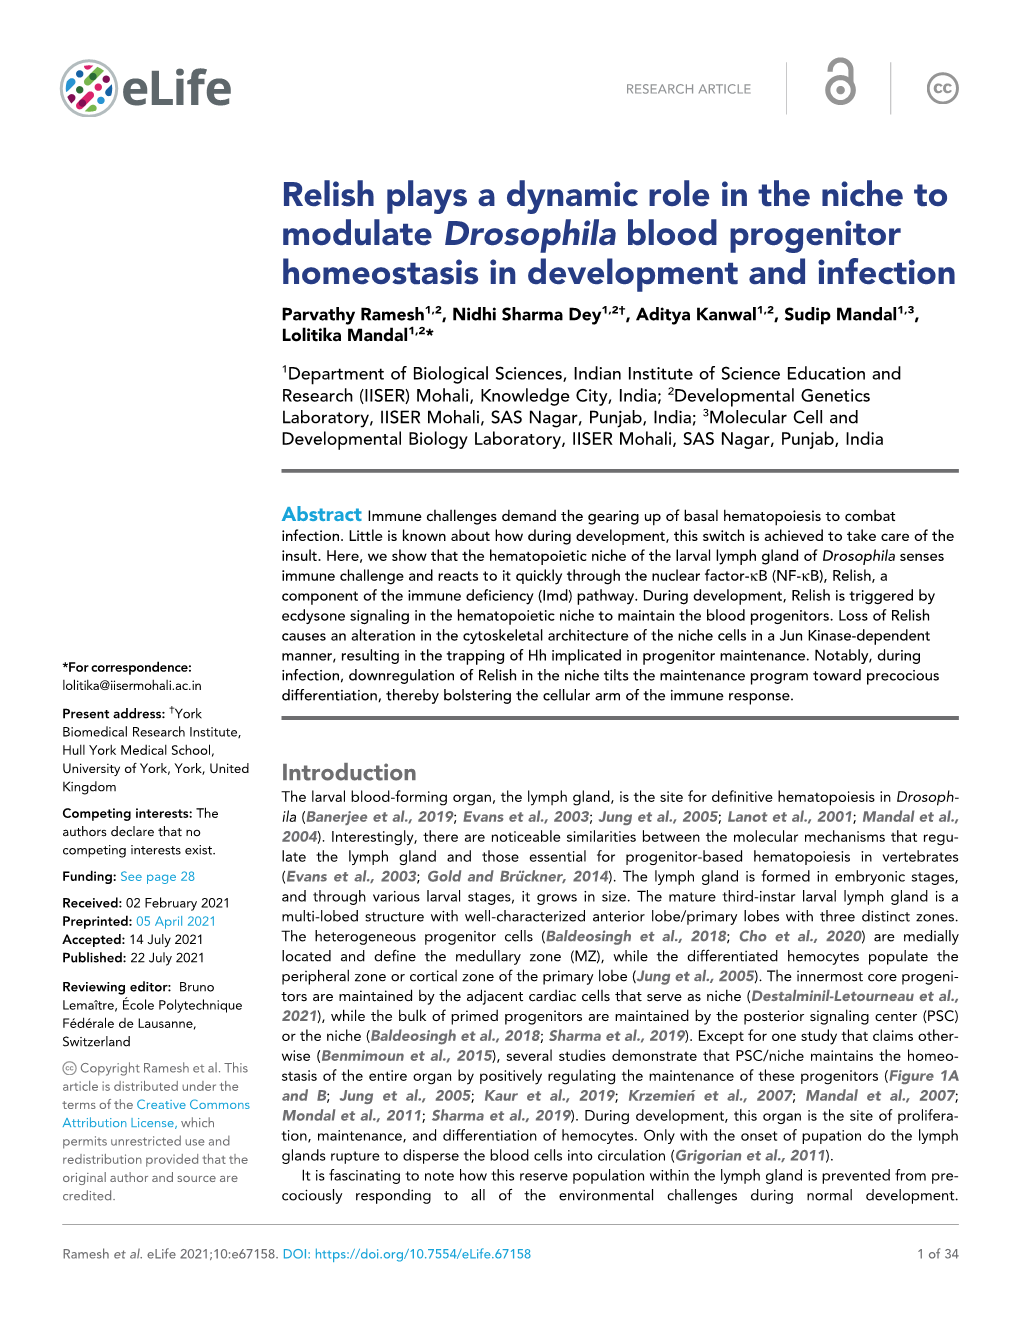 Relish Plays a Dynamic Role in the Niche to Modulate